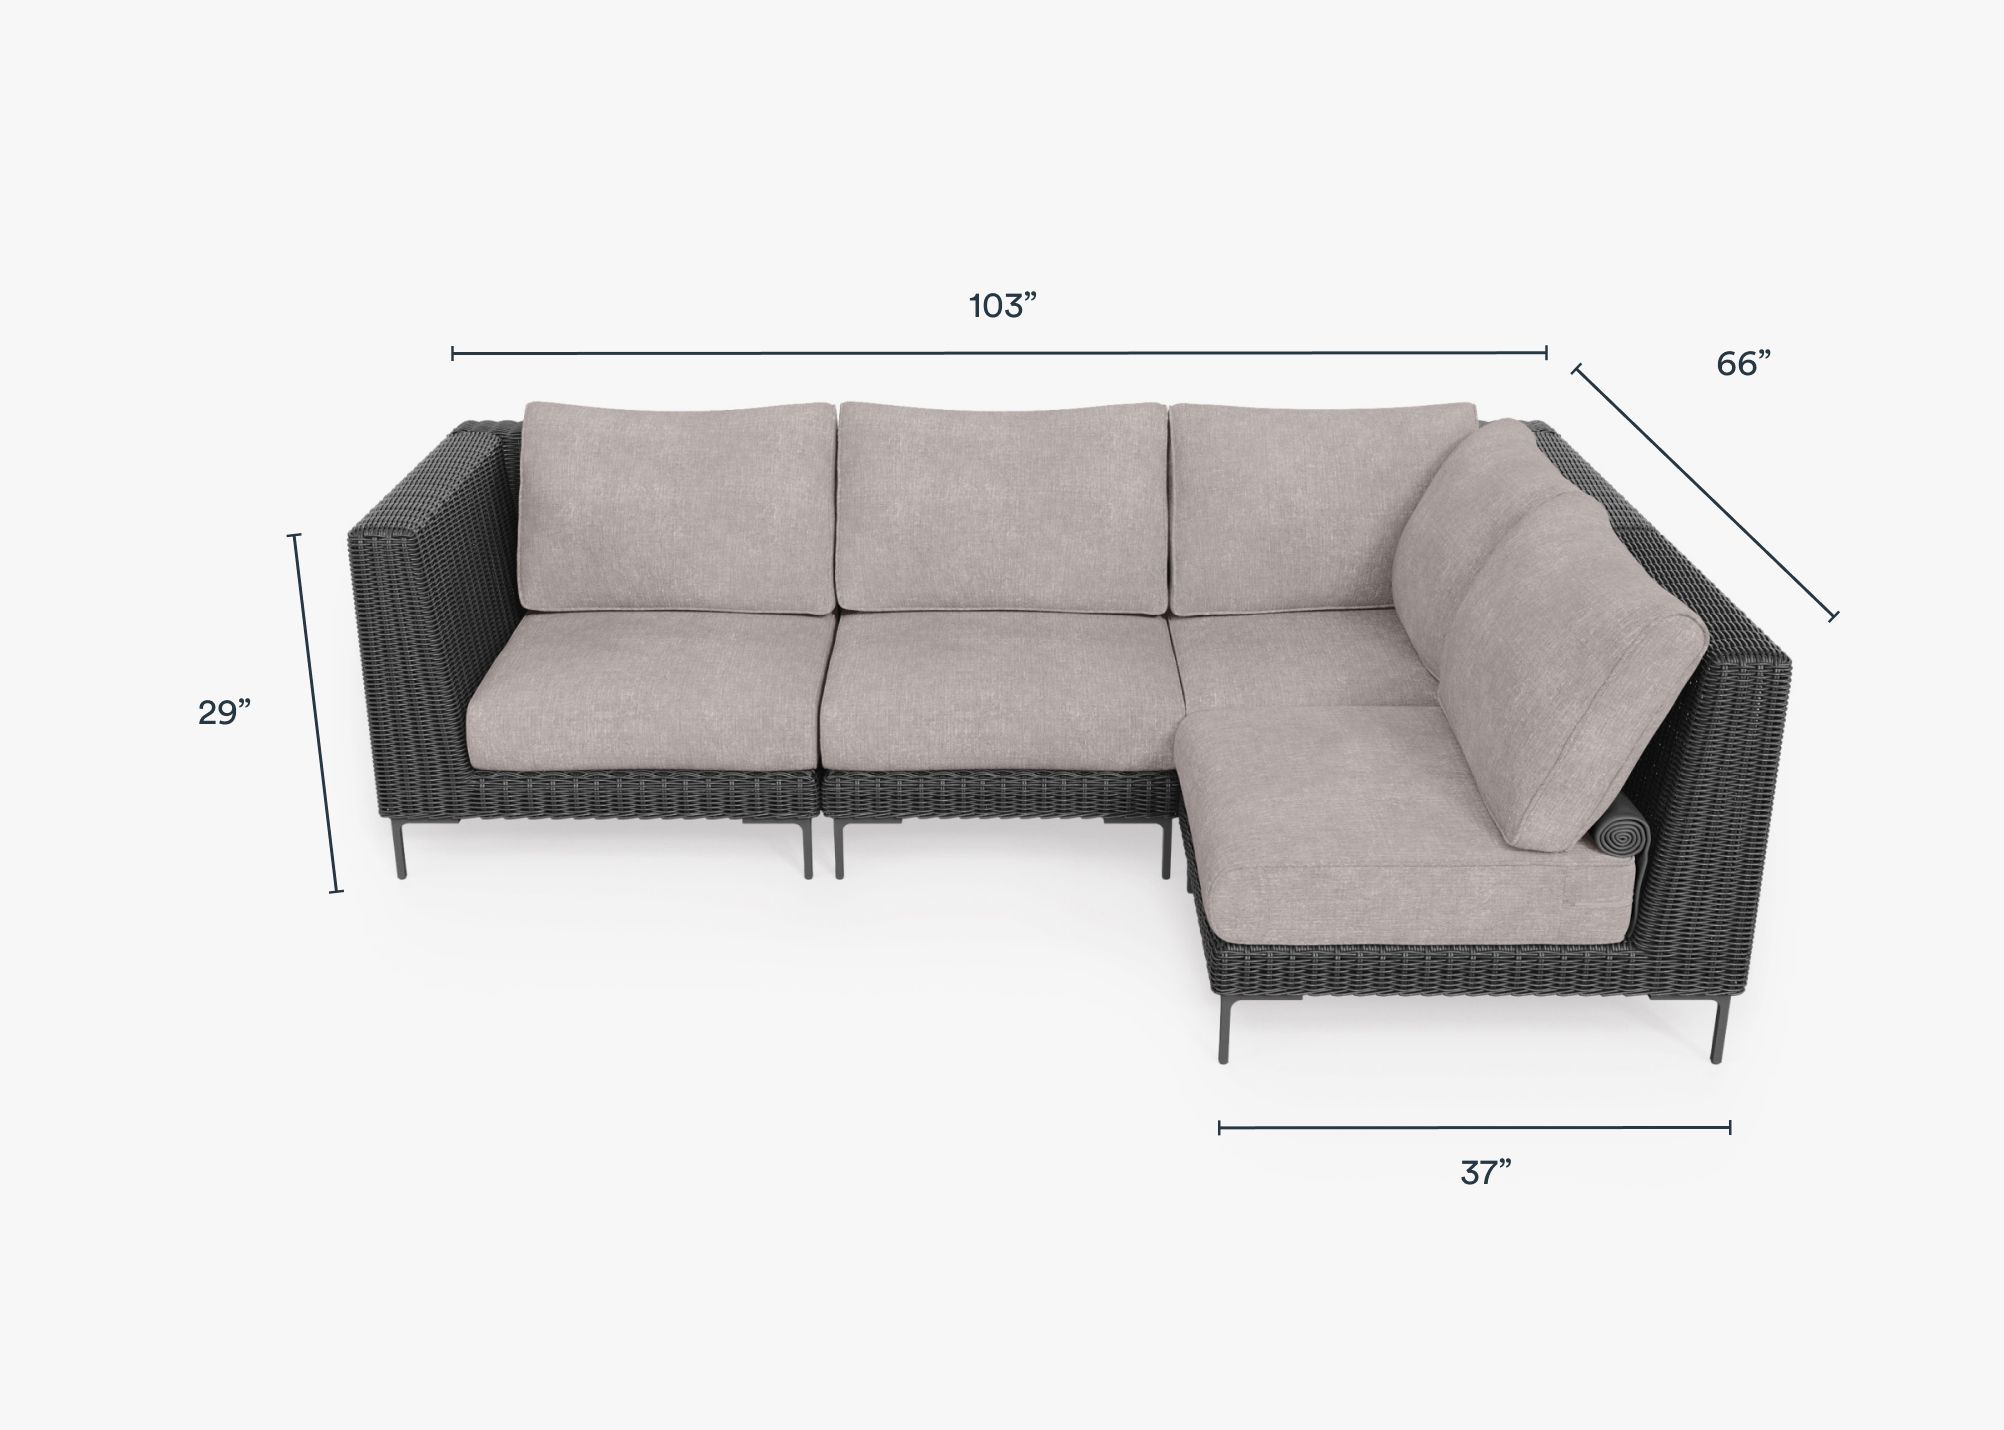 Black Wicker Outdoor L Sectional - 4 Seat dimensions in inches, also listed under Dimensions and Weights.